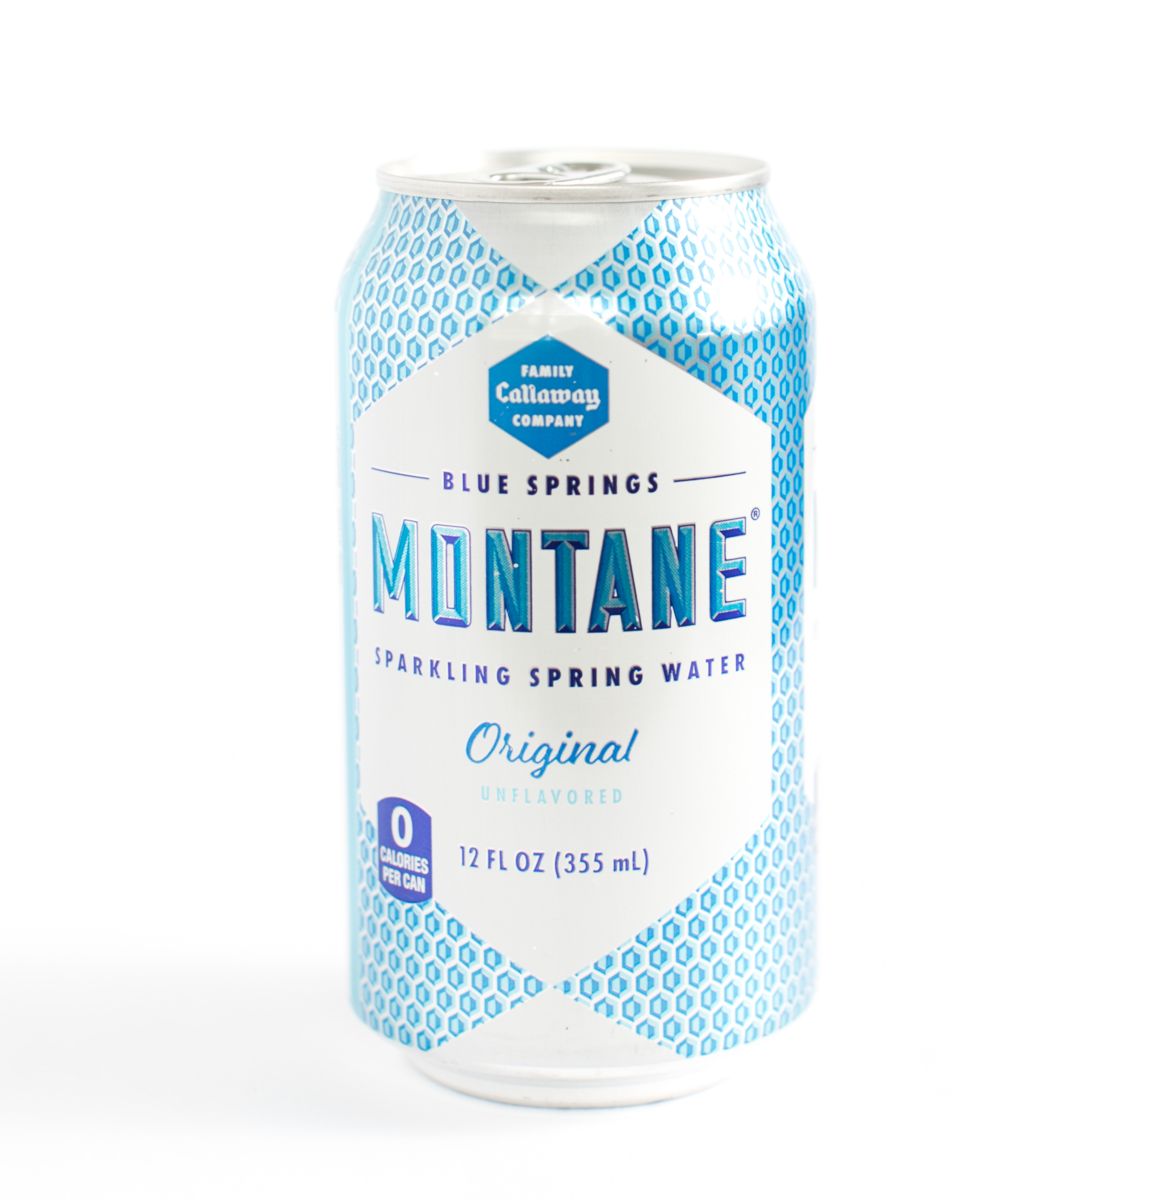 Sparkling Spring Water by Montane Sparkling Spring Water